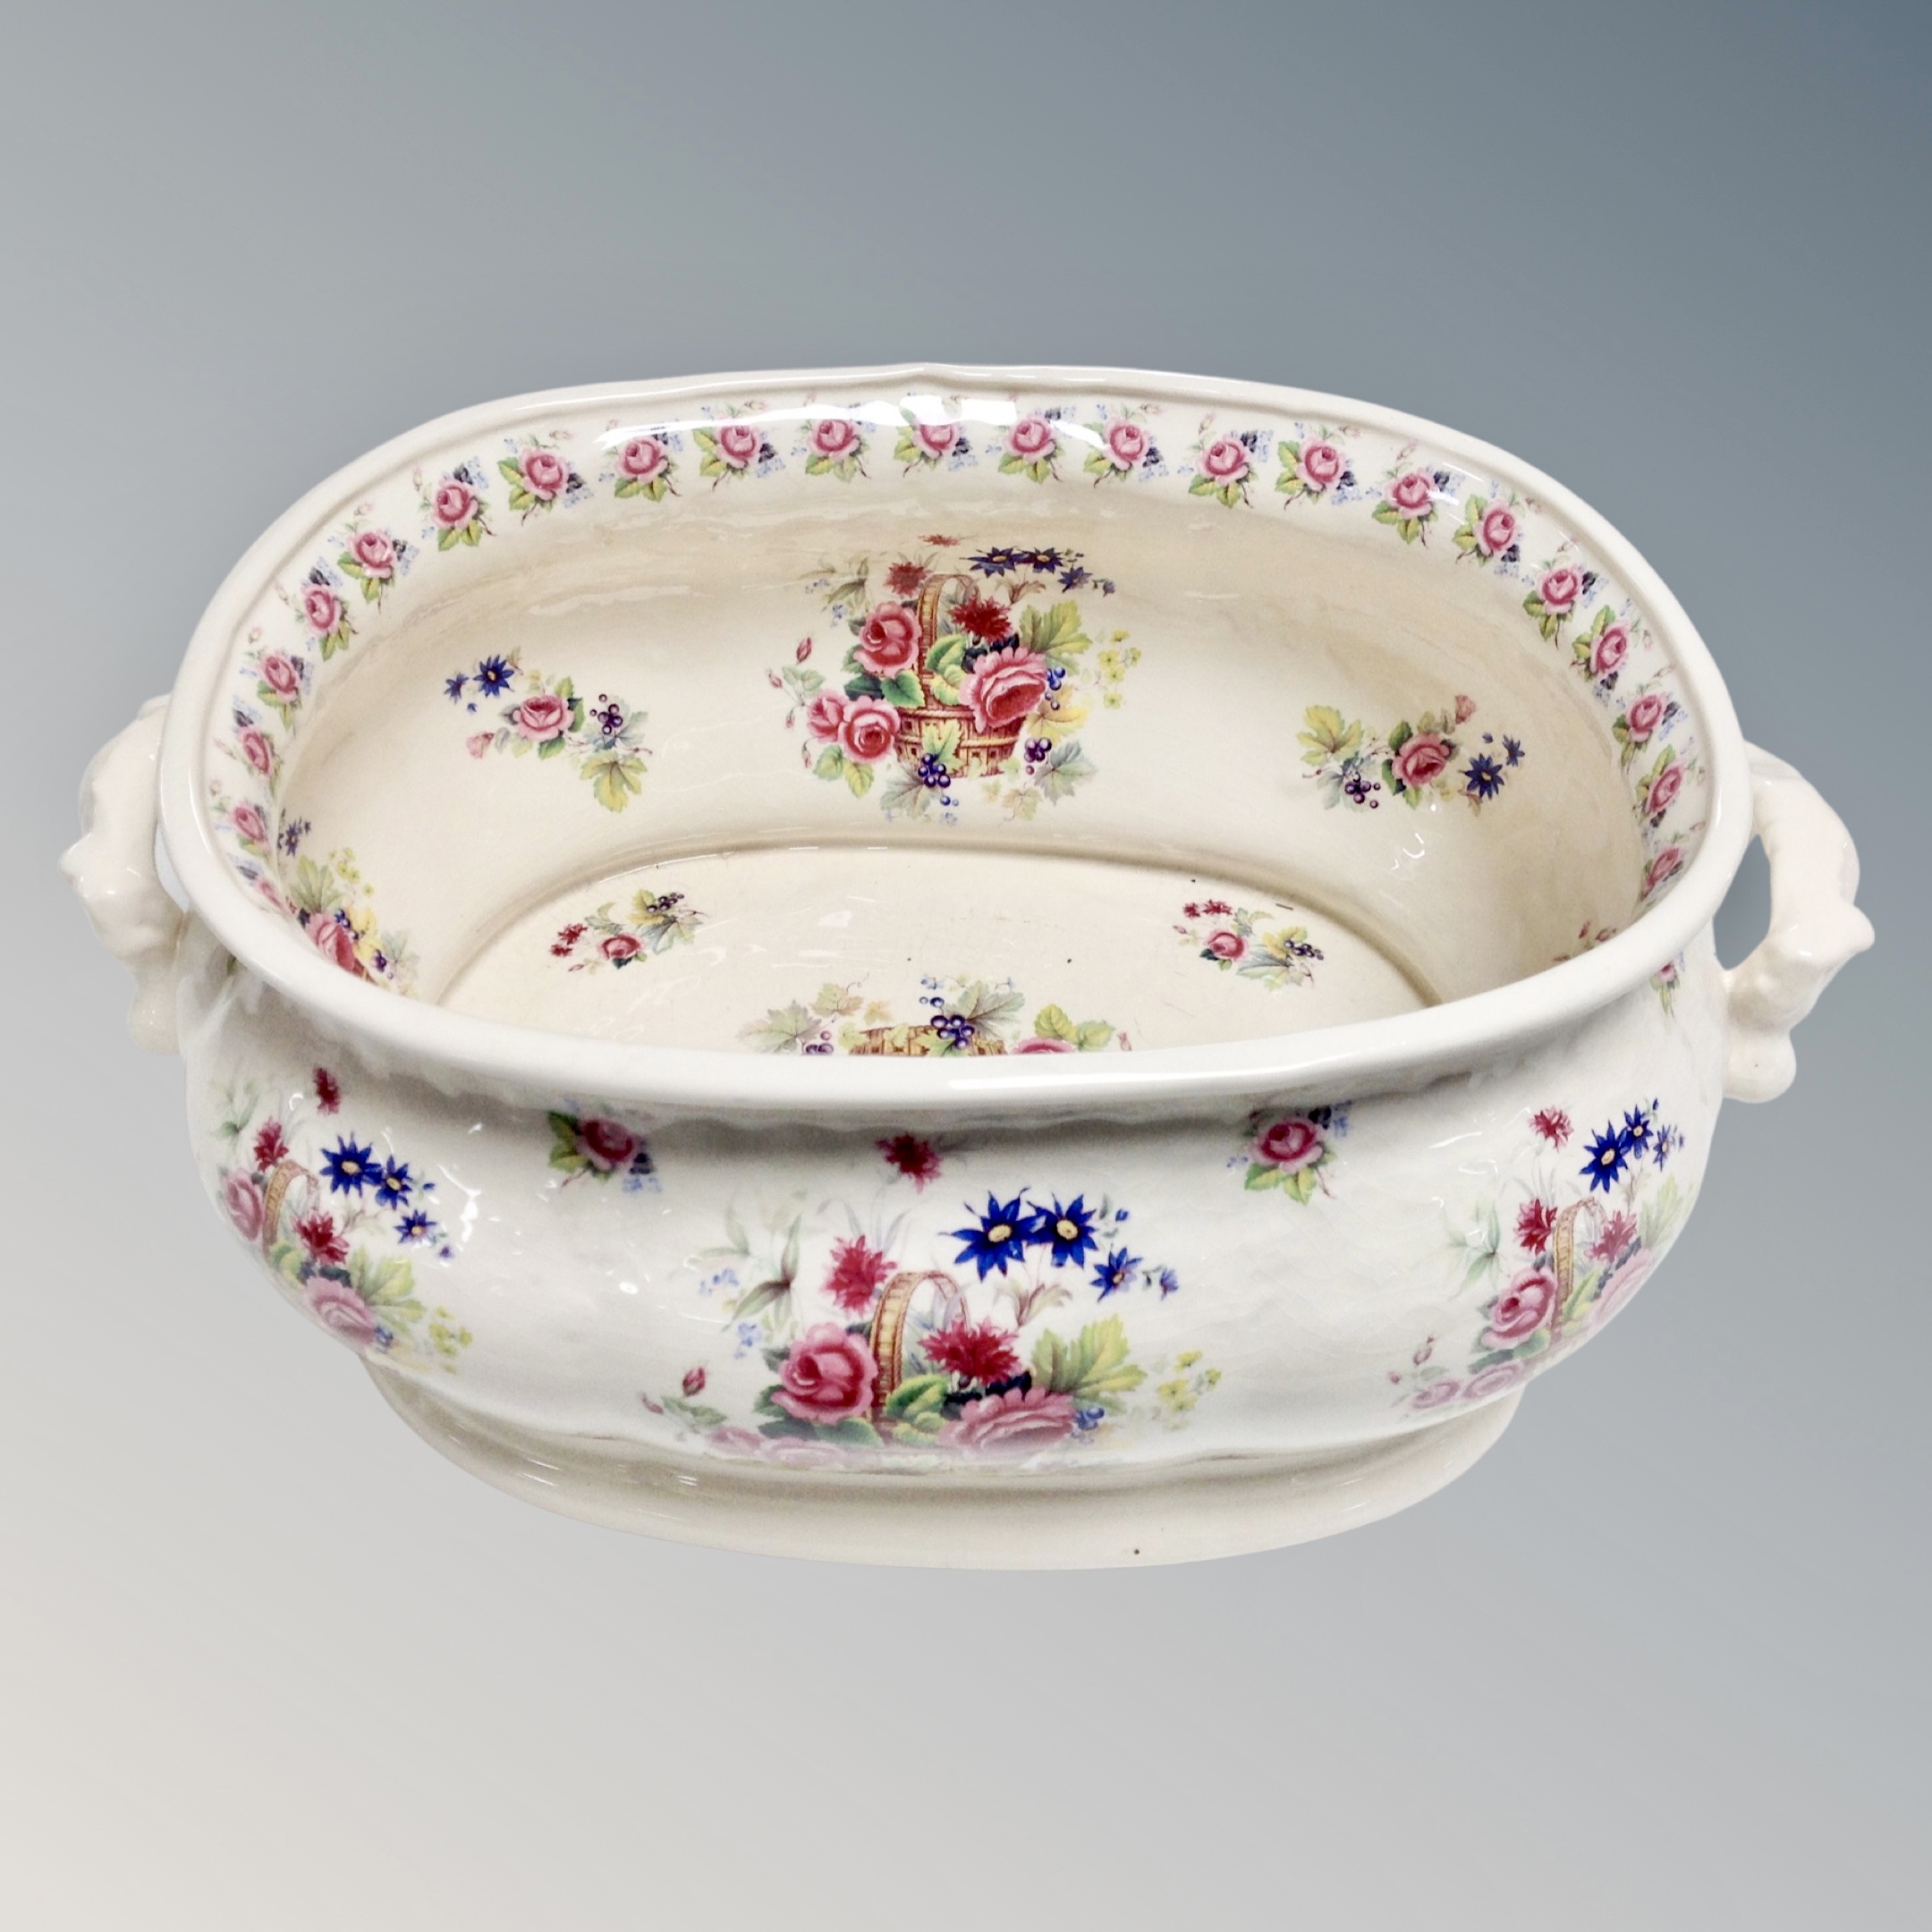 A cream floral wash jug and basin together with further twin handled foot bath - Image 2 of 2